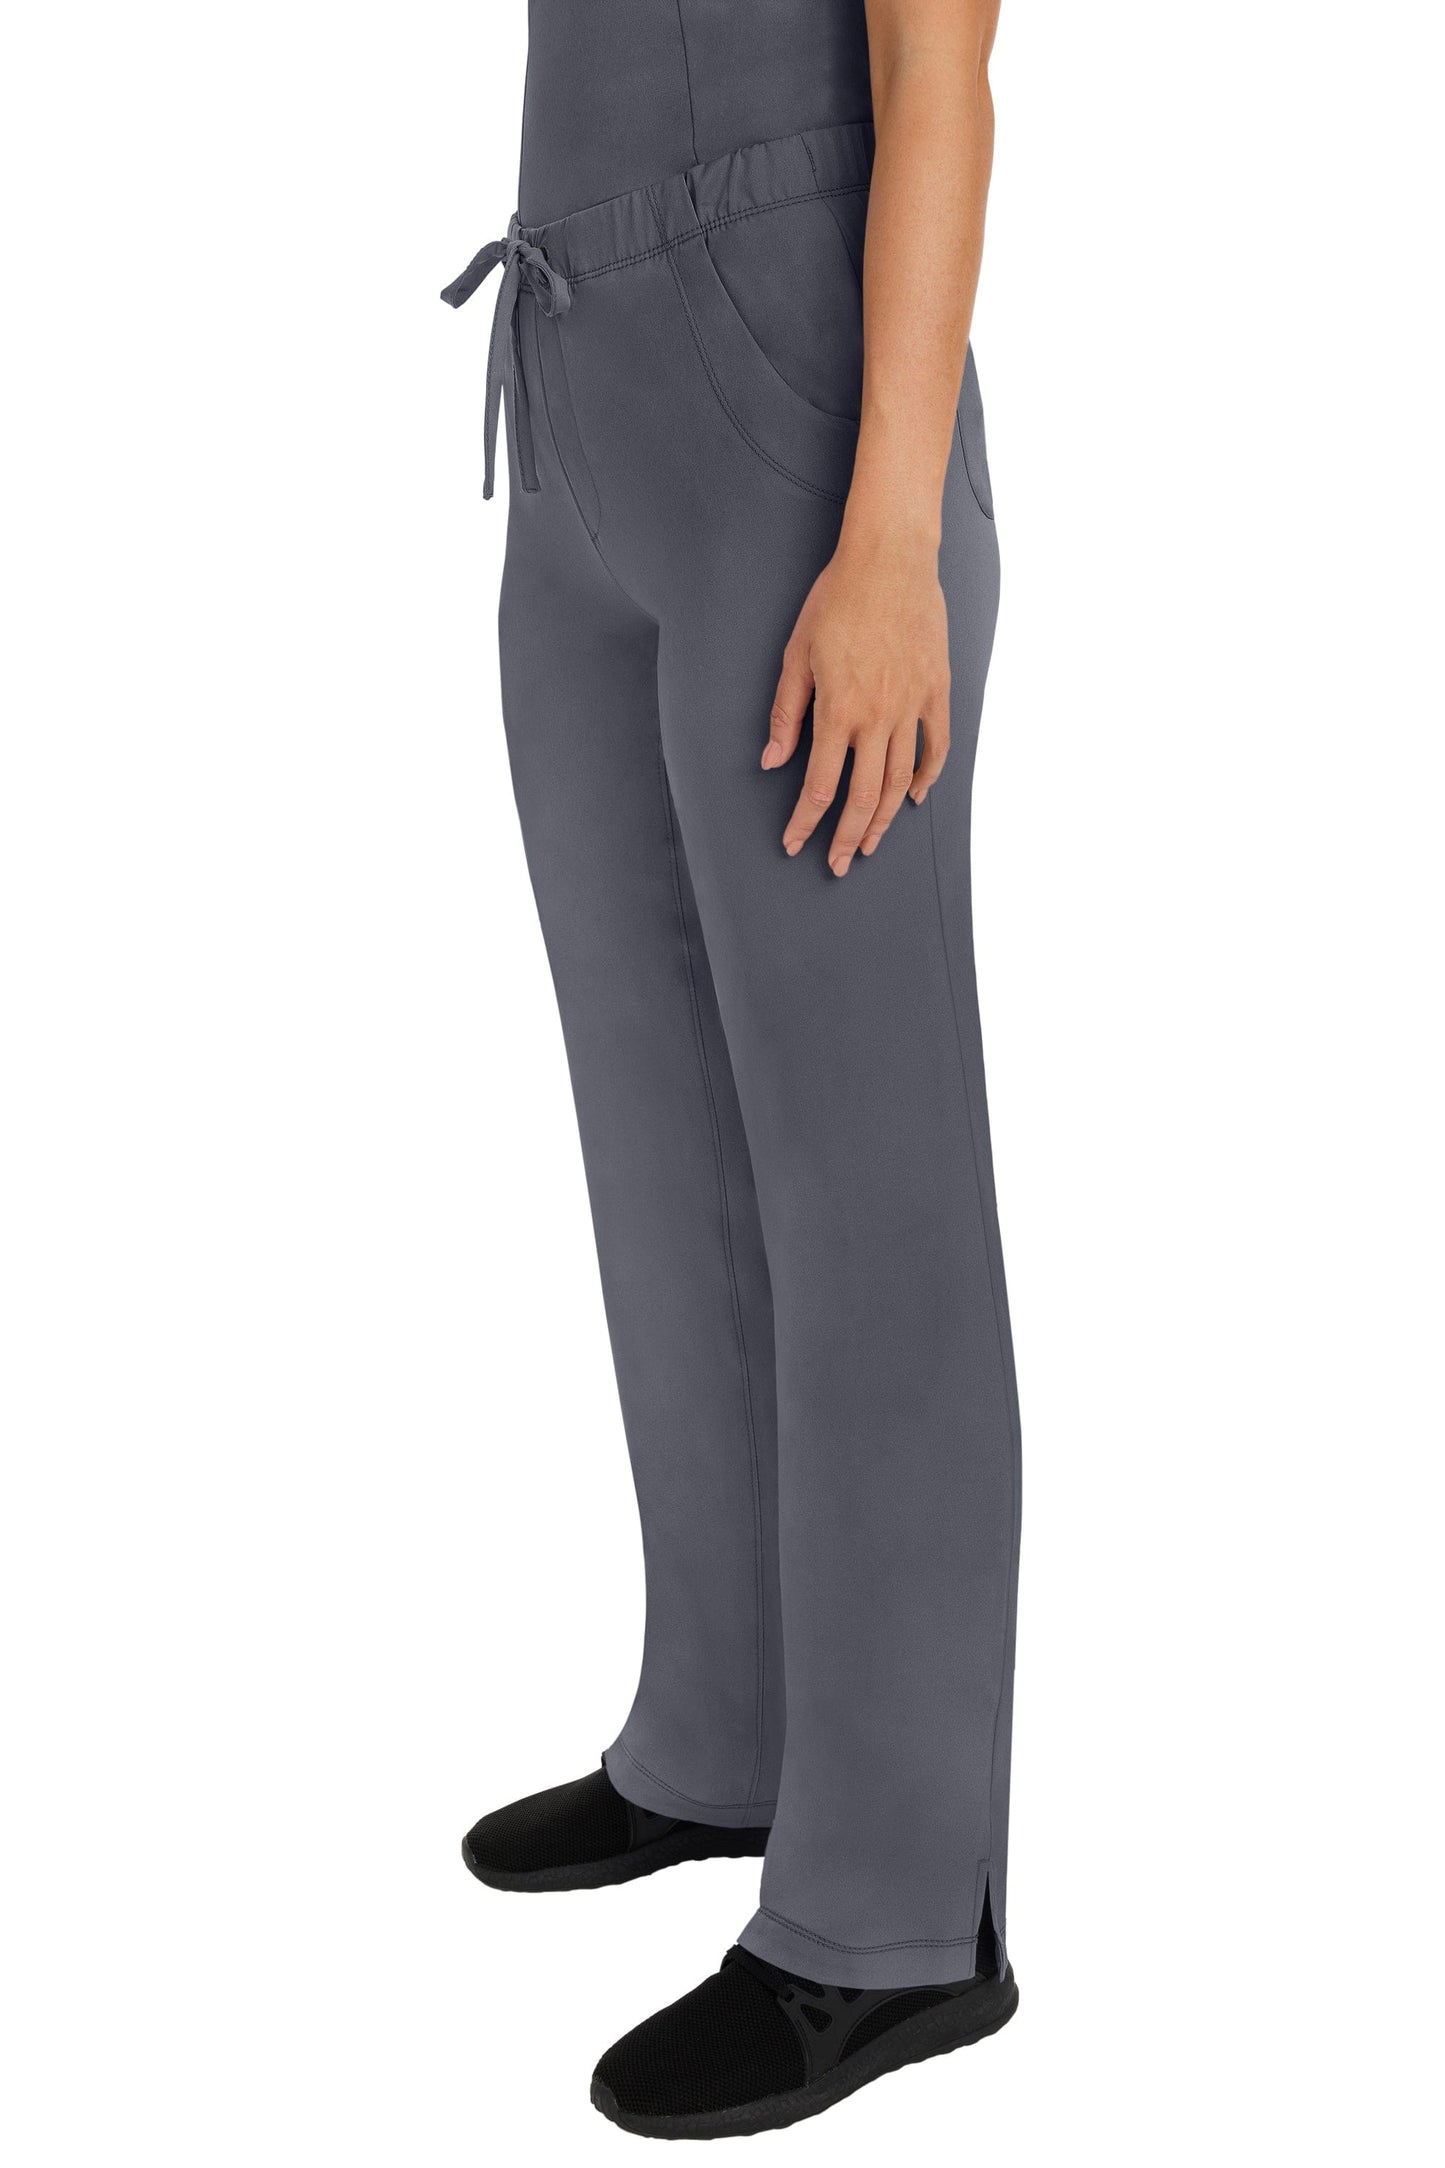 Healing Hands HH Works  9560T Tall Scrub Pant